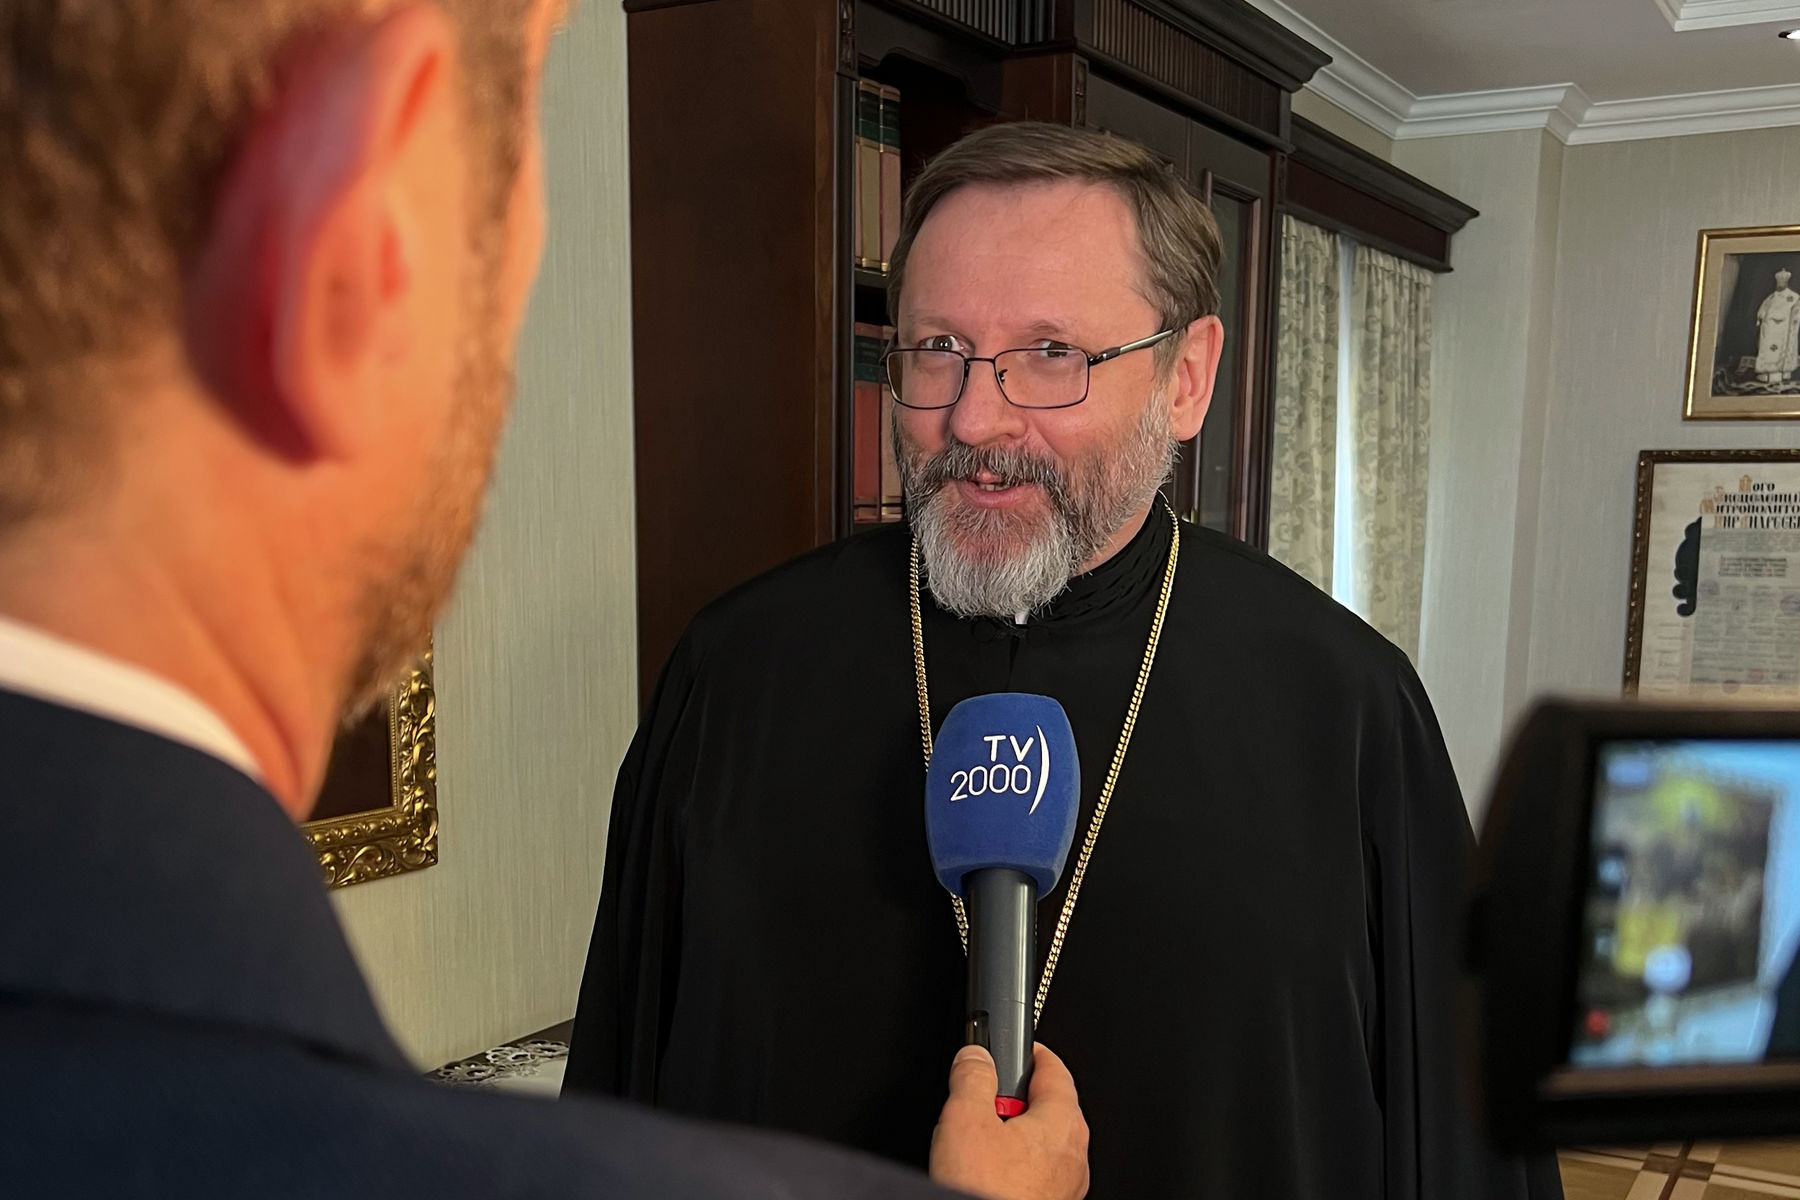 “A just peace is not a utopia”: His Beatitude Sviatoslav in an interview with the Italian channel TV2000